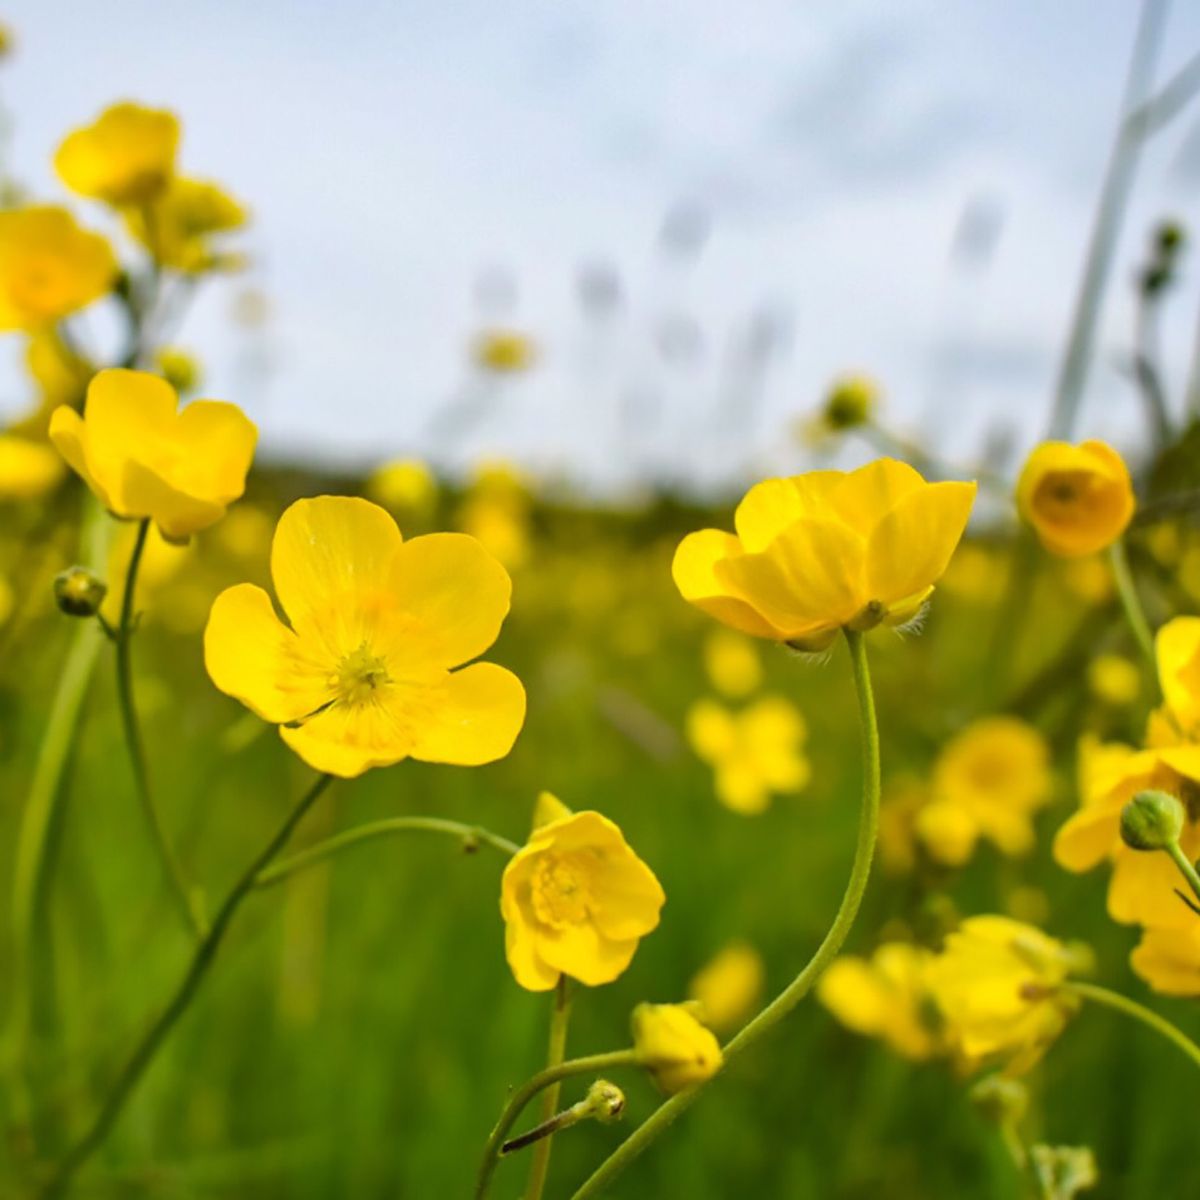 Closeup of bright yellow buttercup flowers.